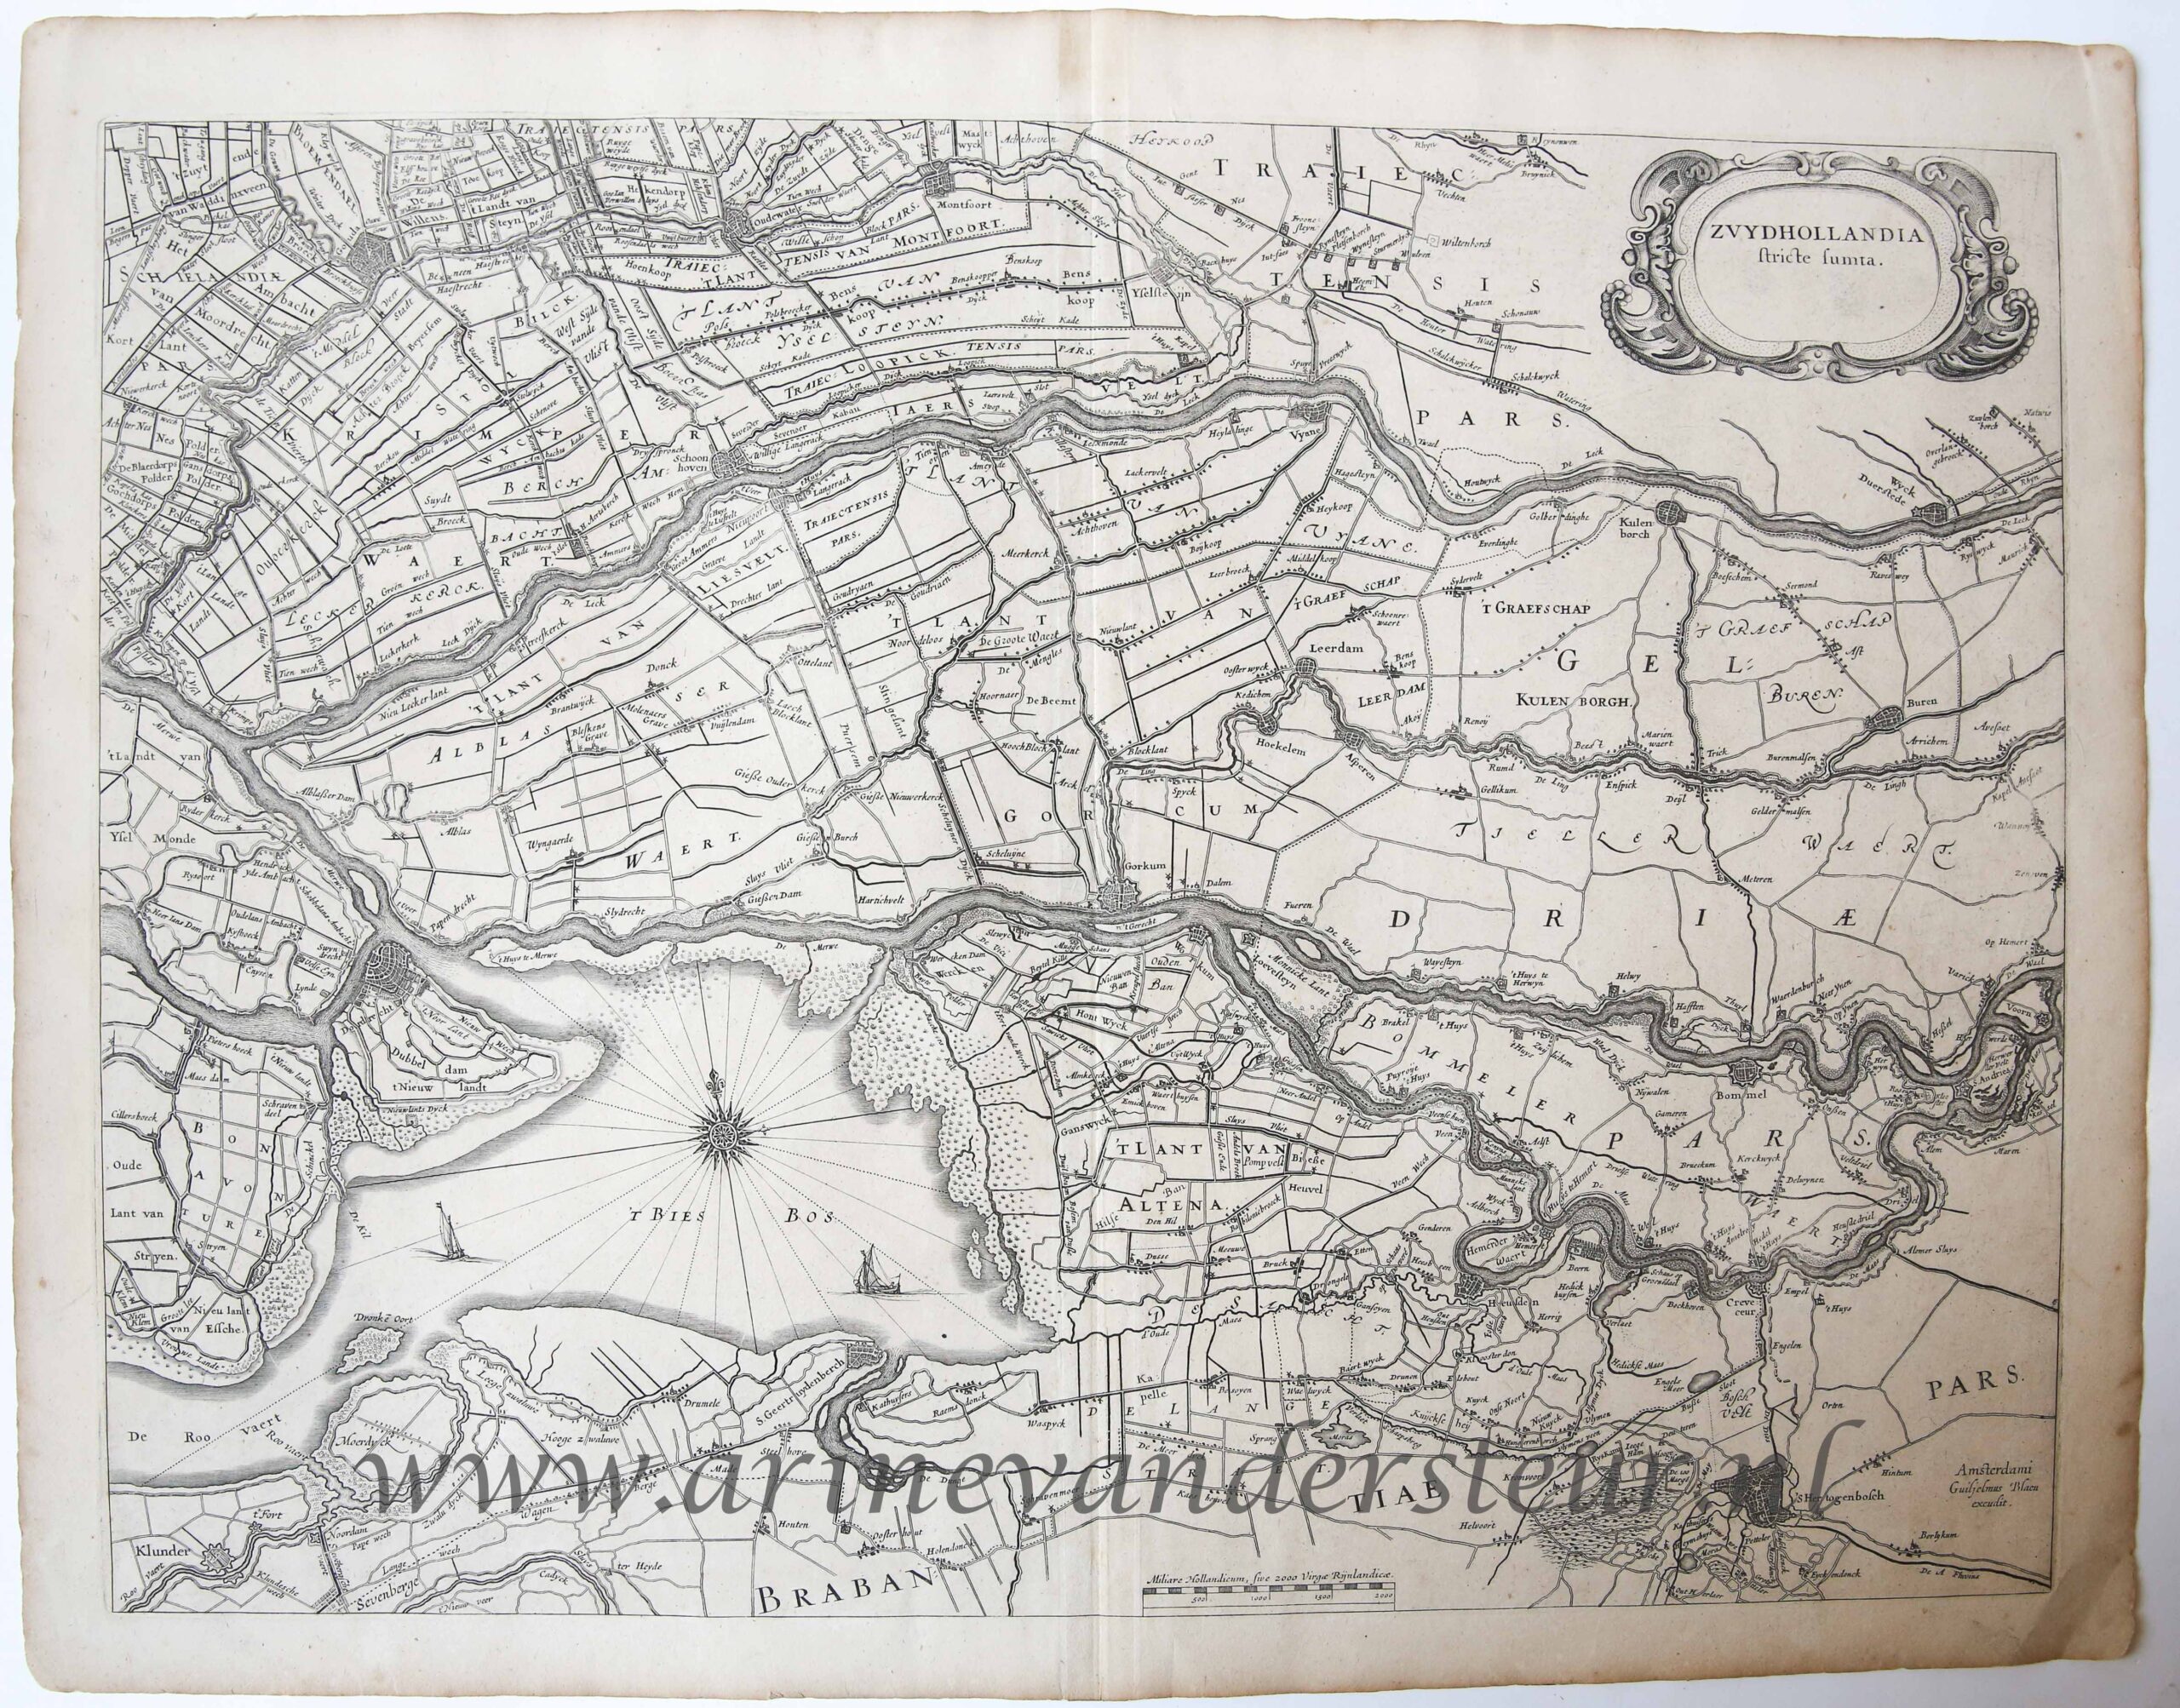 [Cartography, Antique print, engraving] Map of South Holland (Zuid Holland), published after 1674.